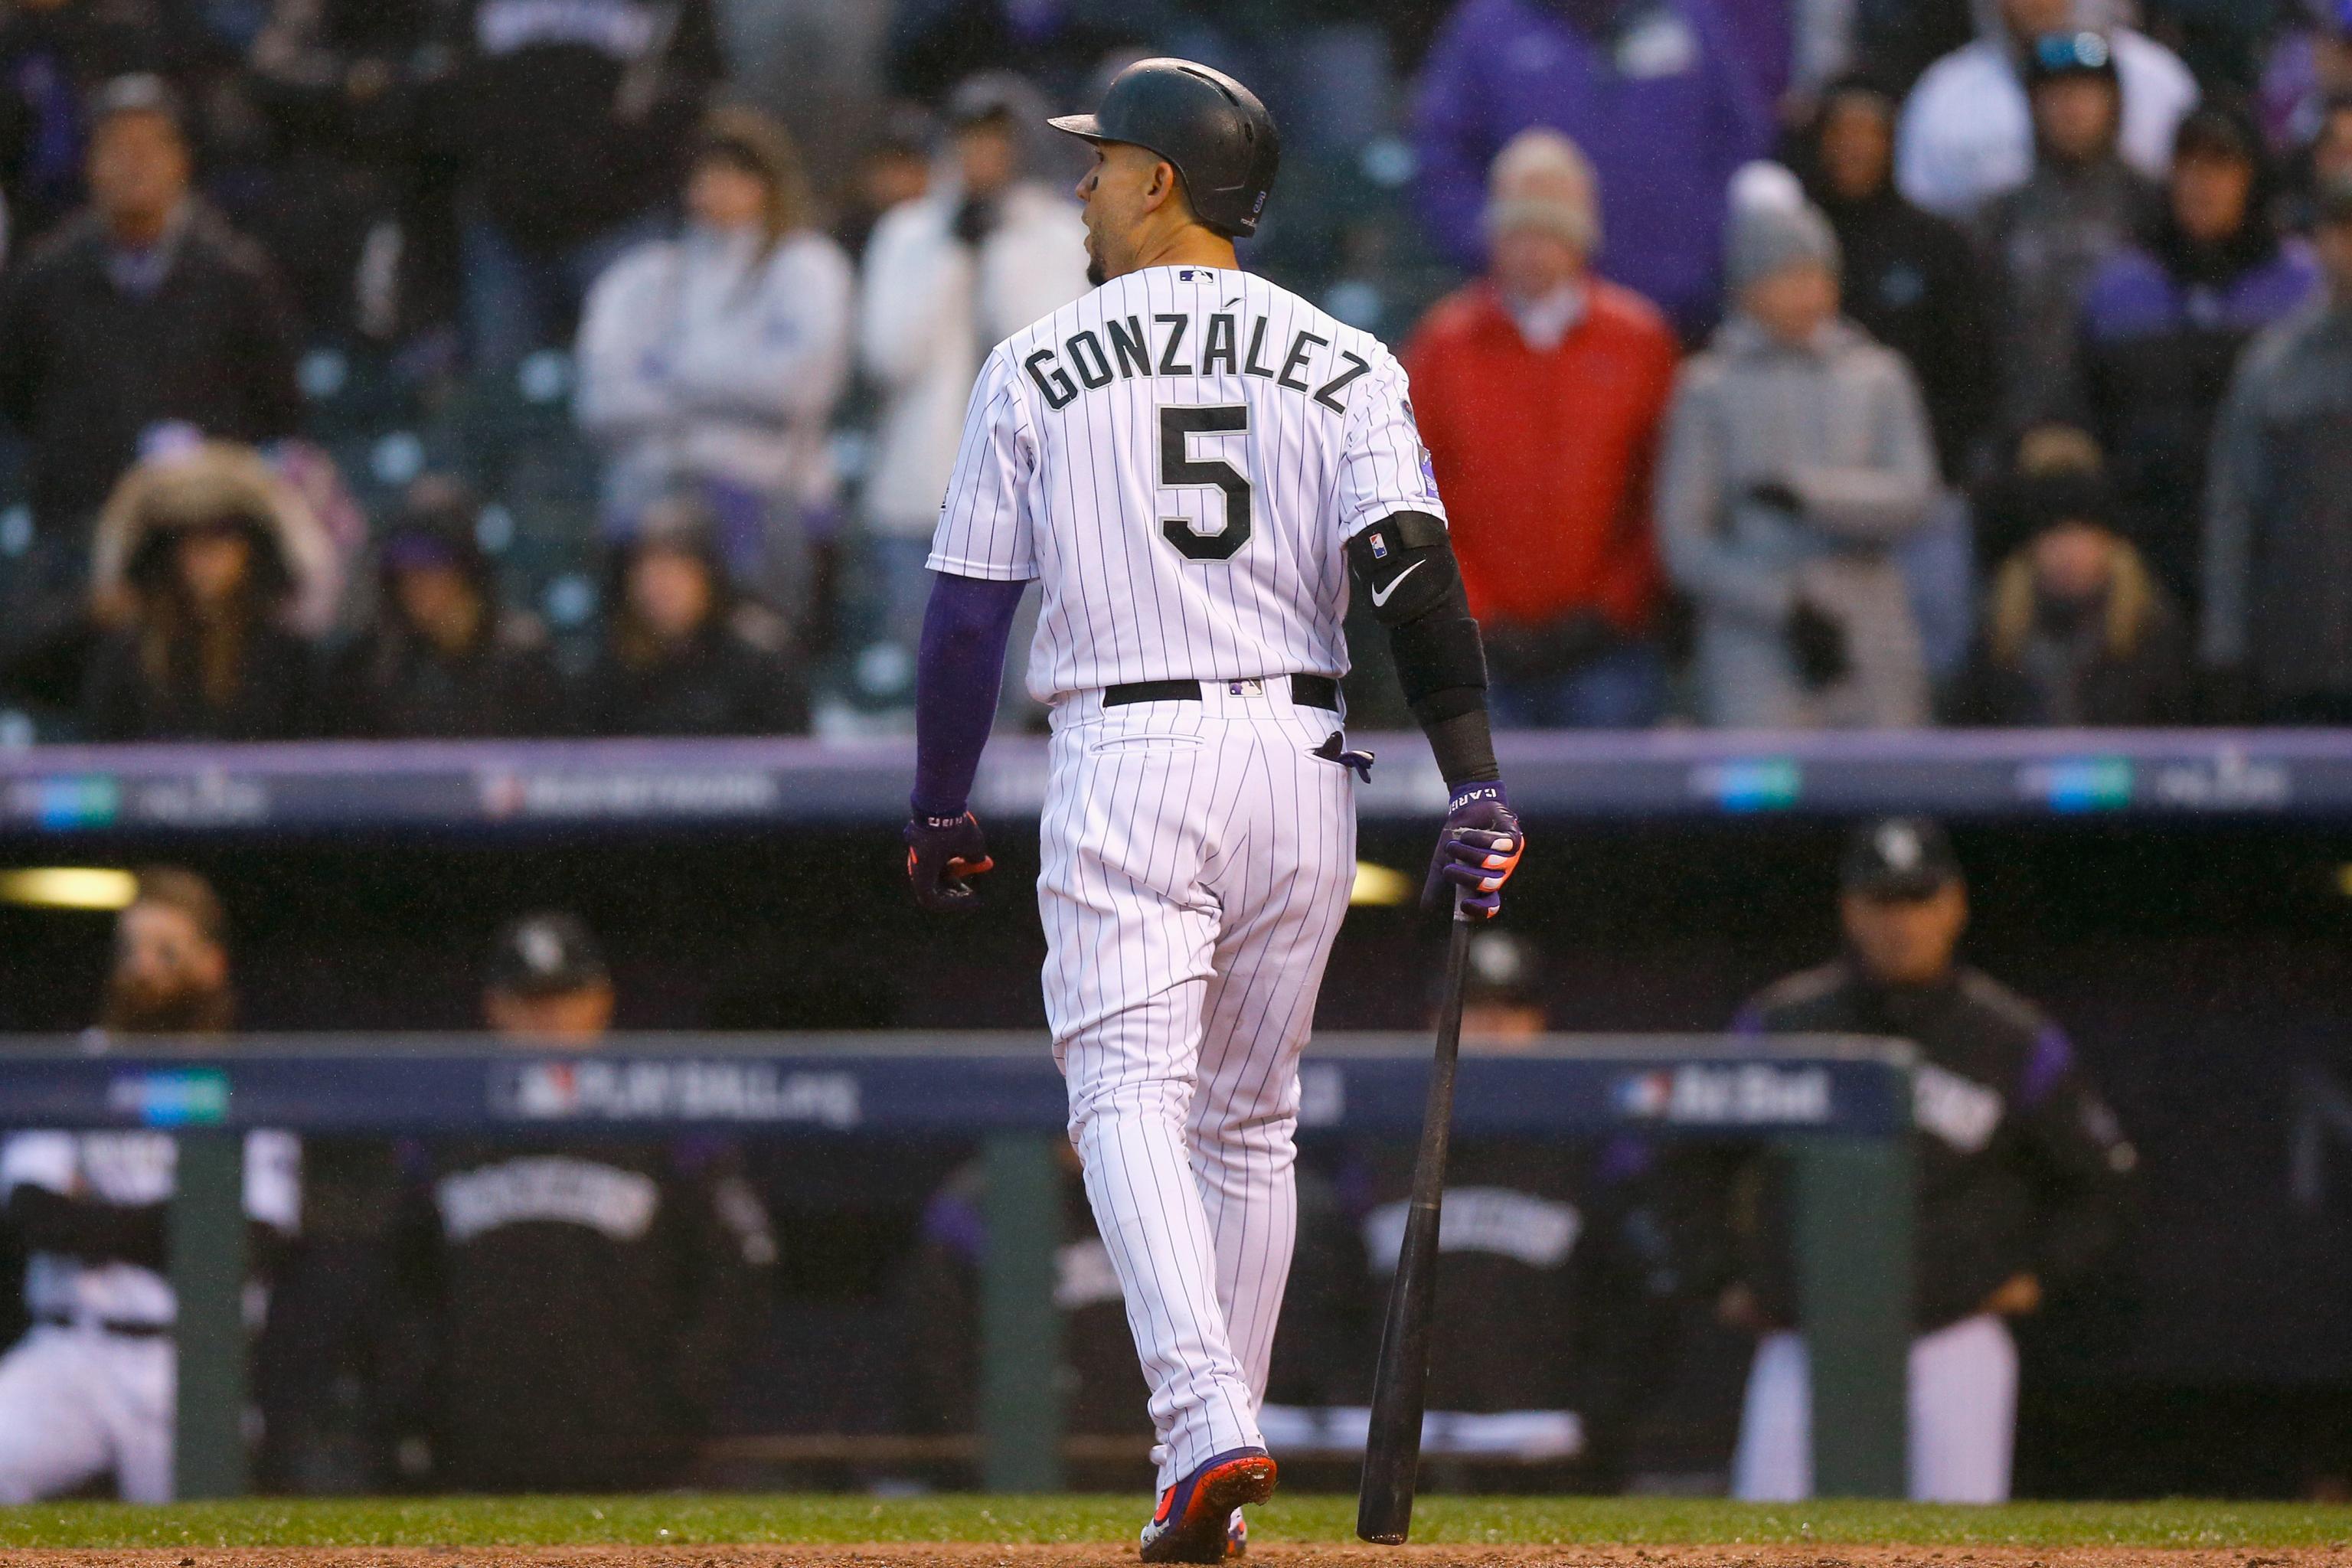 MLB Free Agency: Landing spots for Carlos Gonzalez - Page 2